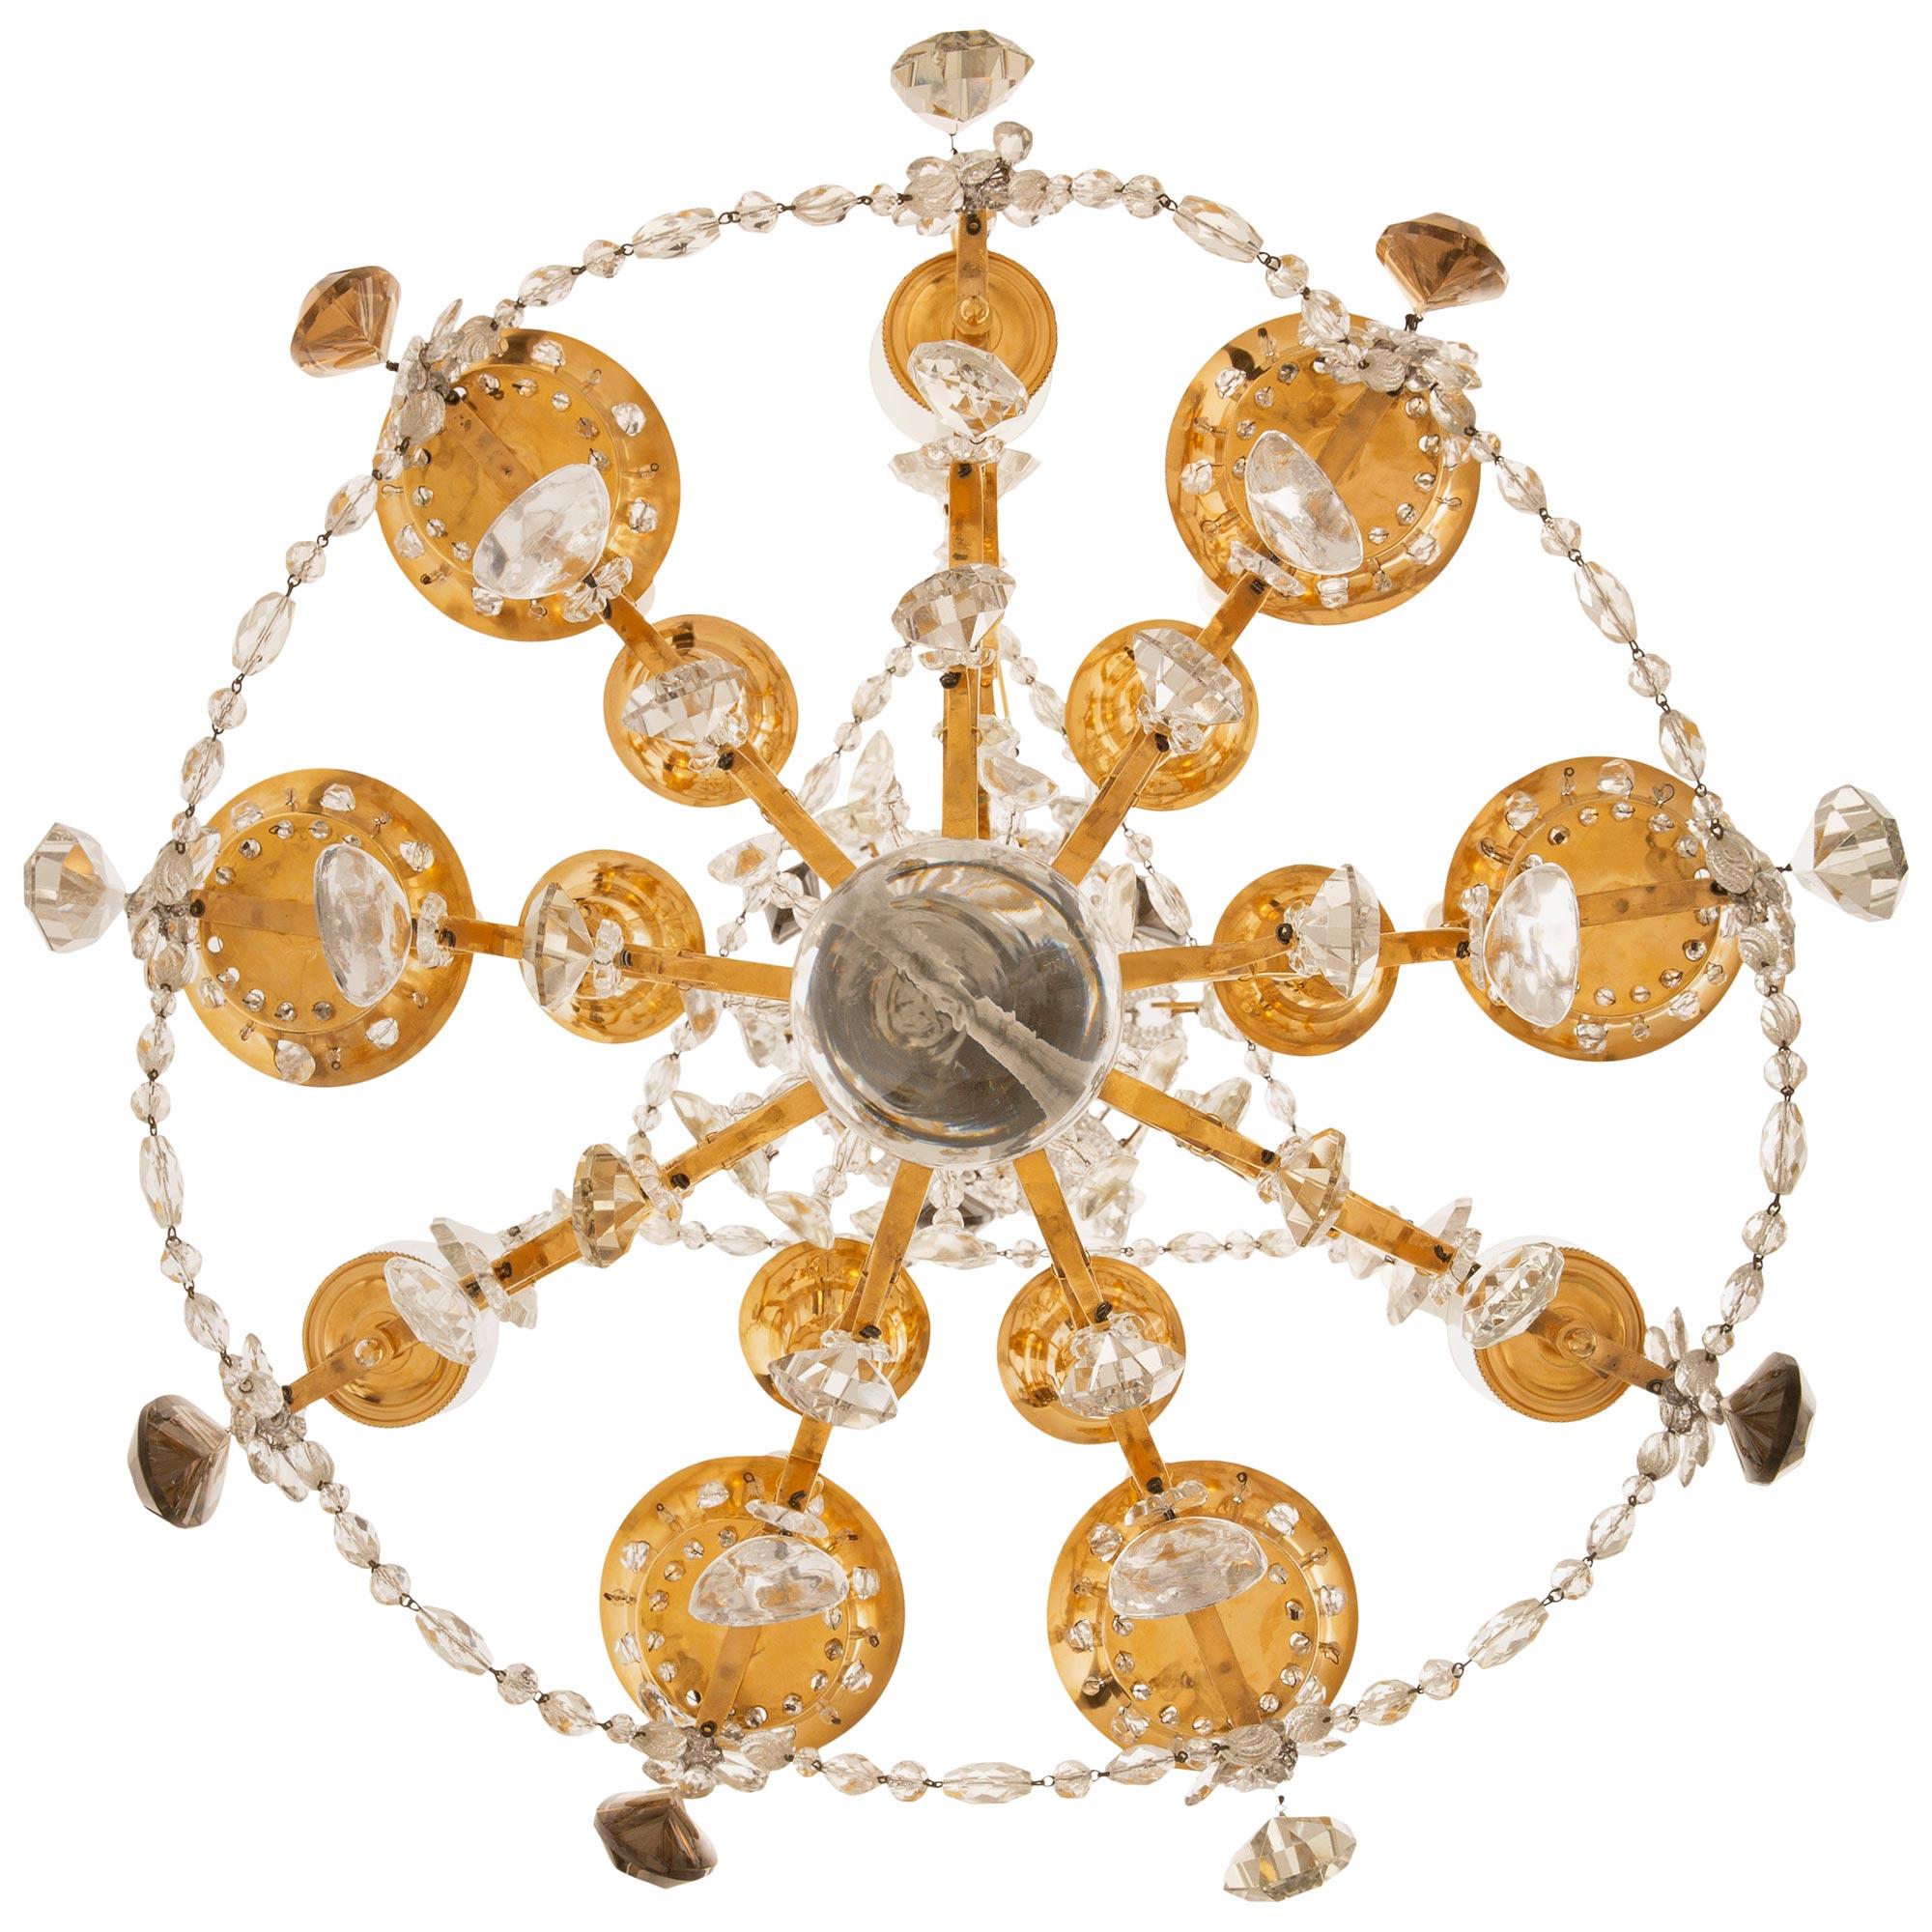 A stunning and most unique French late 19th century Louis XVI st. Ormolu, Silvered Bronze and Crystal chandelier, possibly by Maison Bagues. The nine arm, thirty light chandelier is centered at the bottom by an elegant solid smooth Crystal ball